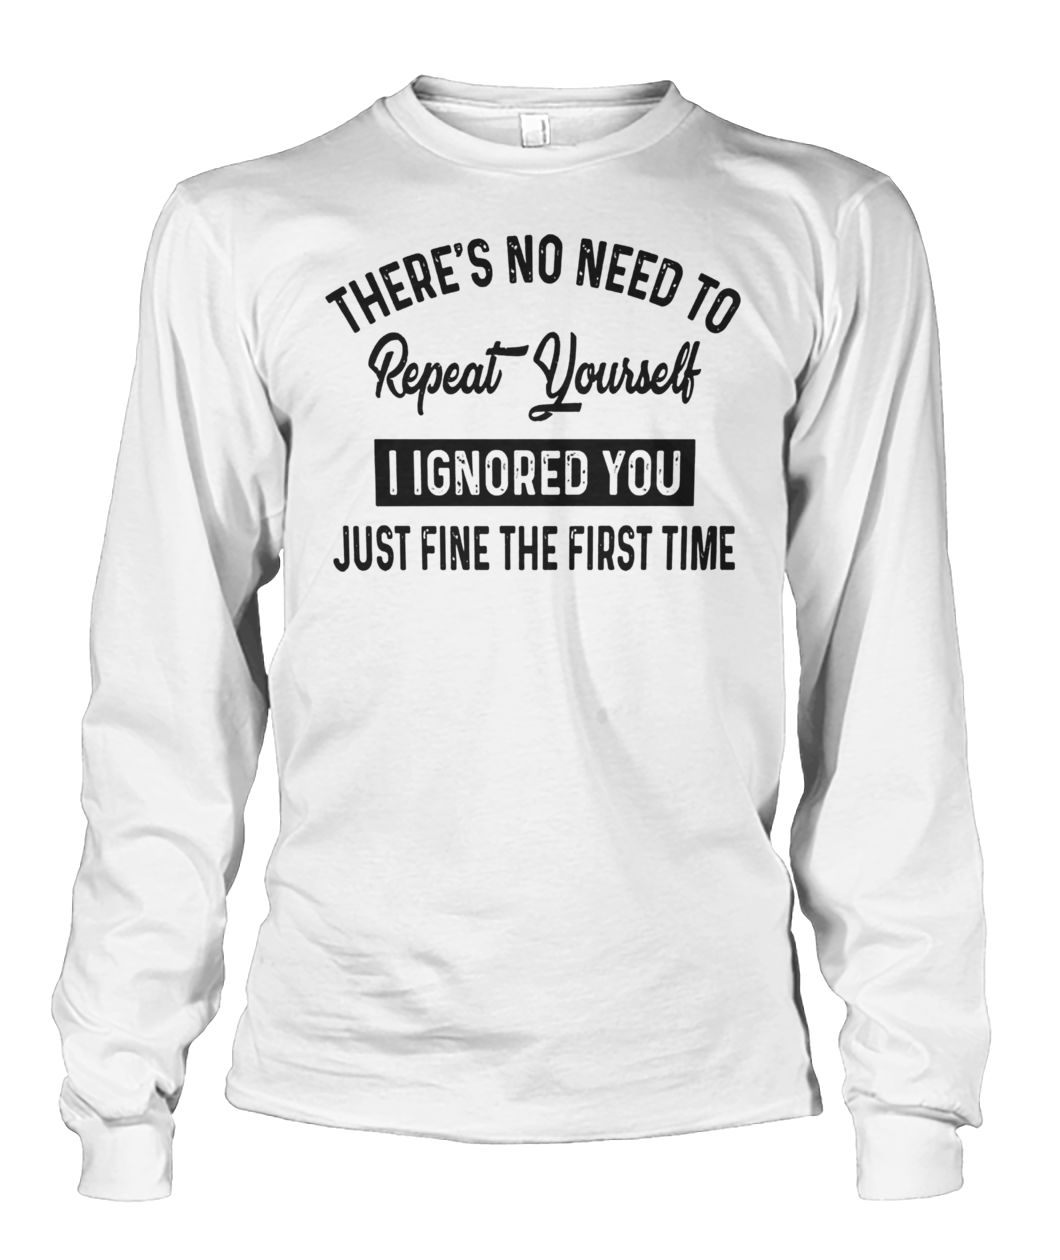 There’s no need to repeat yourself I ignored you just fine the first time unisex long sleeve